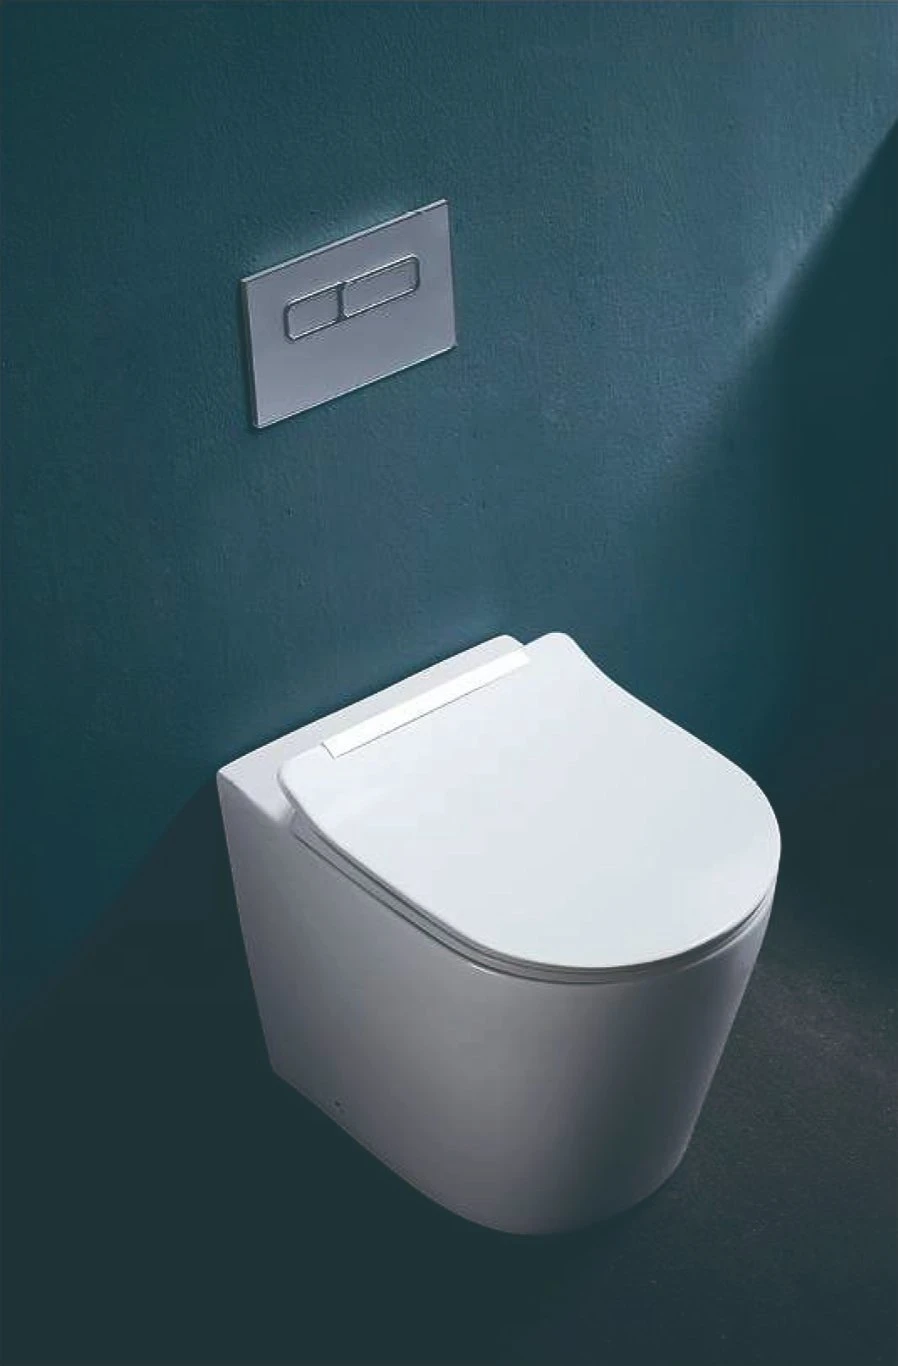 Full Wall Faced Toilet Suite with Watermark Certificate, Sanitary Wares Porcelain Bathroom Ceramic Toilet